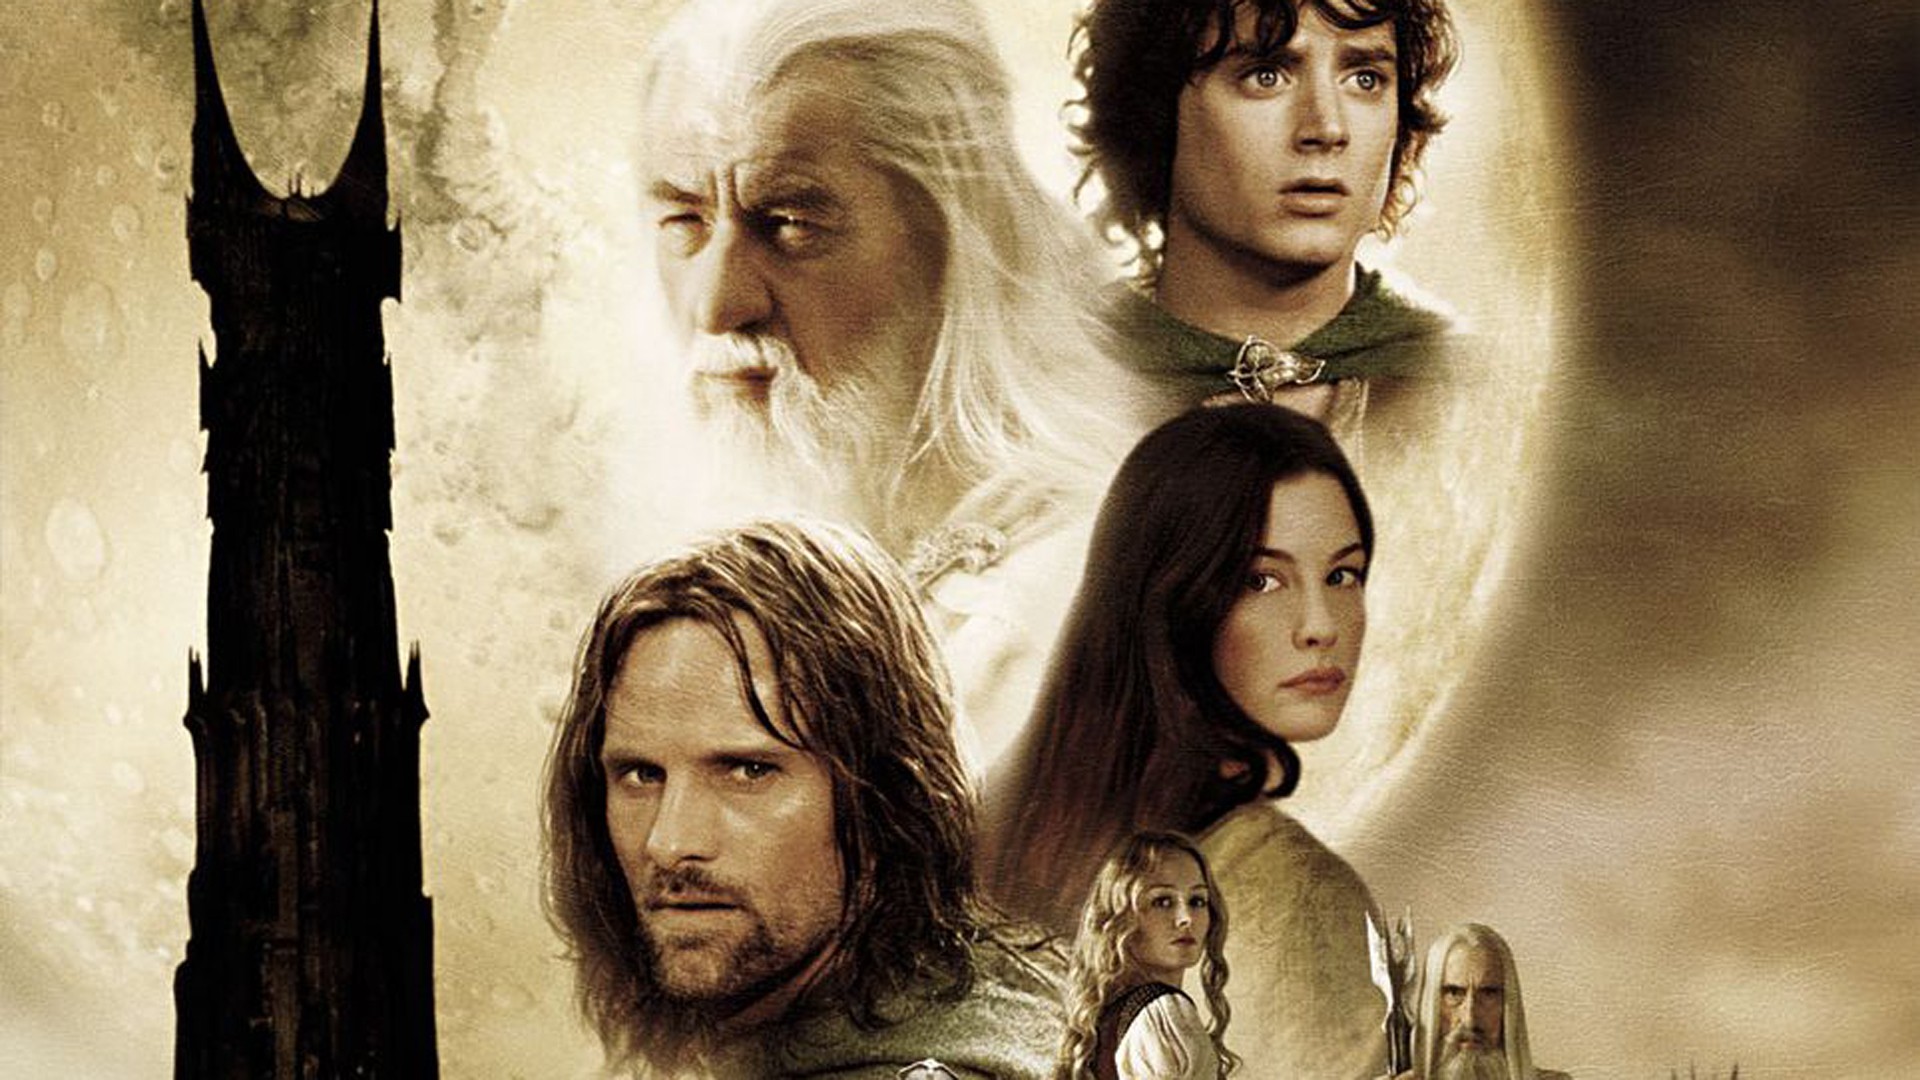 General 1920x1080 movies The Lord of the Rings The Lord of the Rings: The Two Towers Frodo Baggins Gandalf Aragorn Arwen Éowyn Saruman Ian McKellen Viggo Mortensen Elijah Wood Liv Tyler Christopher Lee actor actress Book characters J. R. R. Tolkien